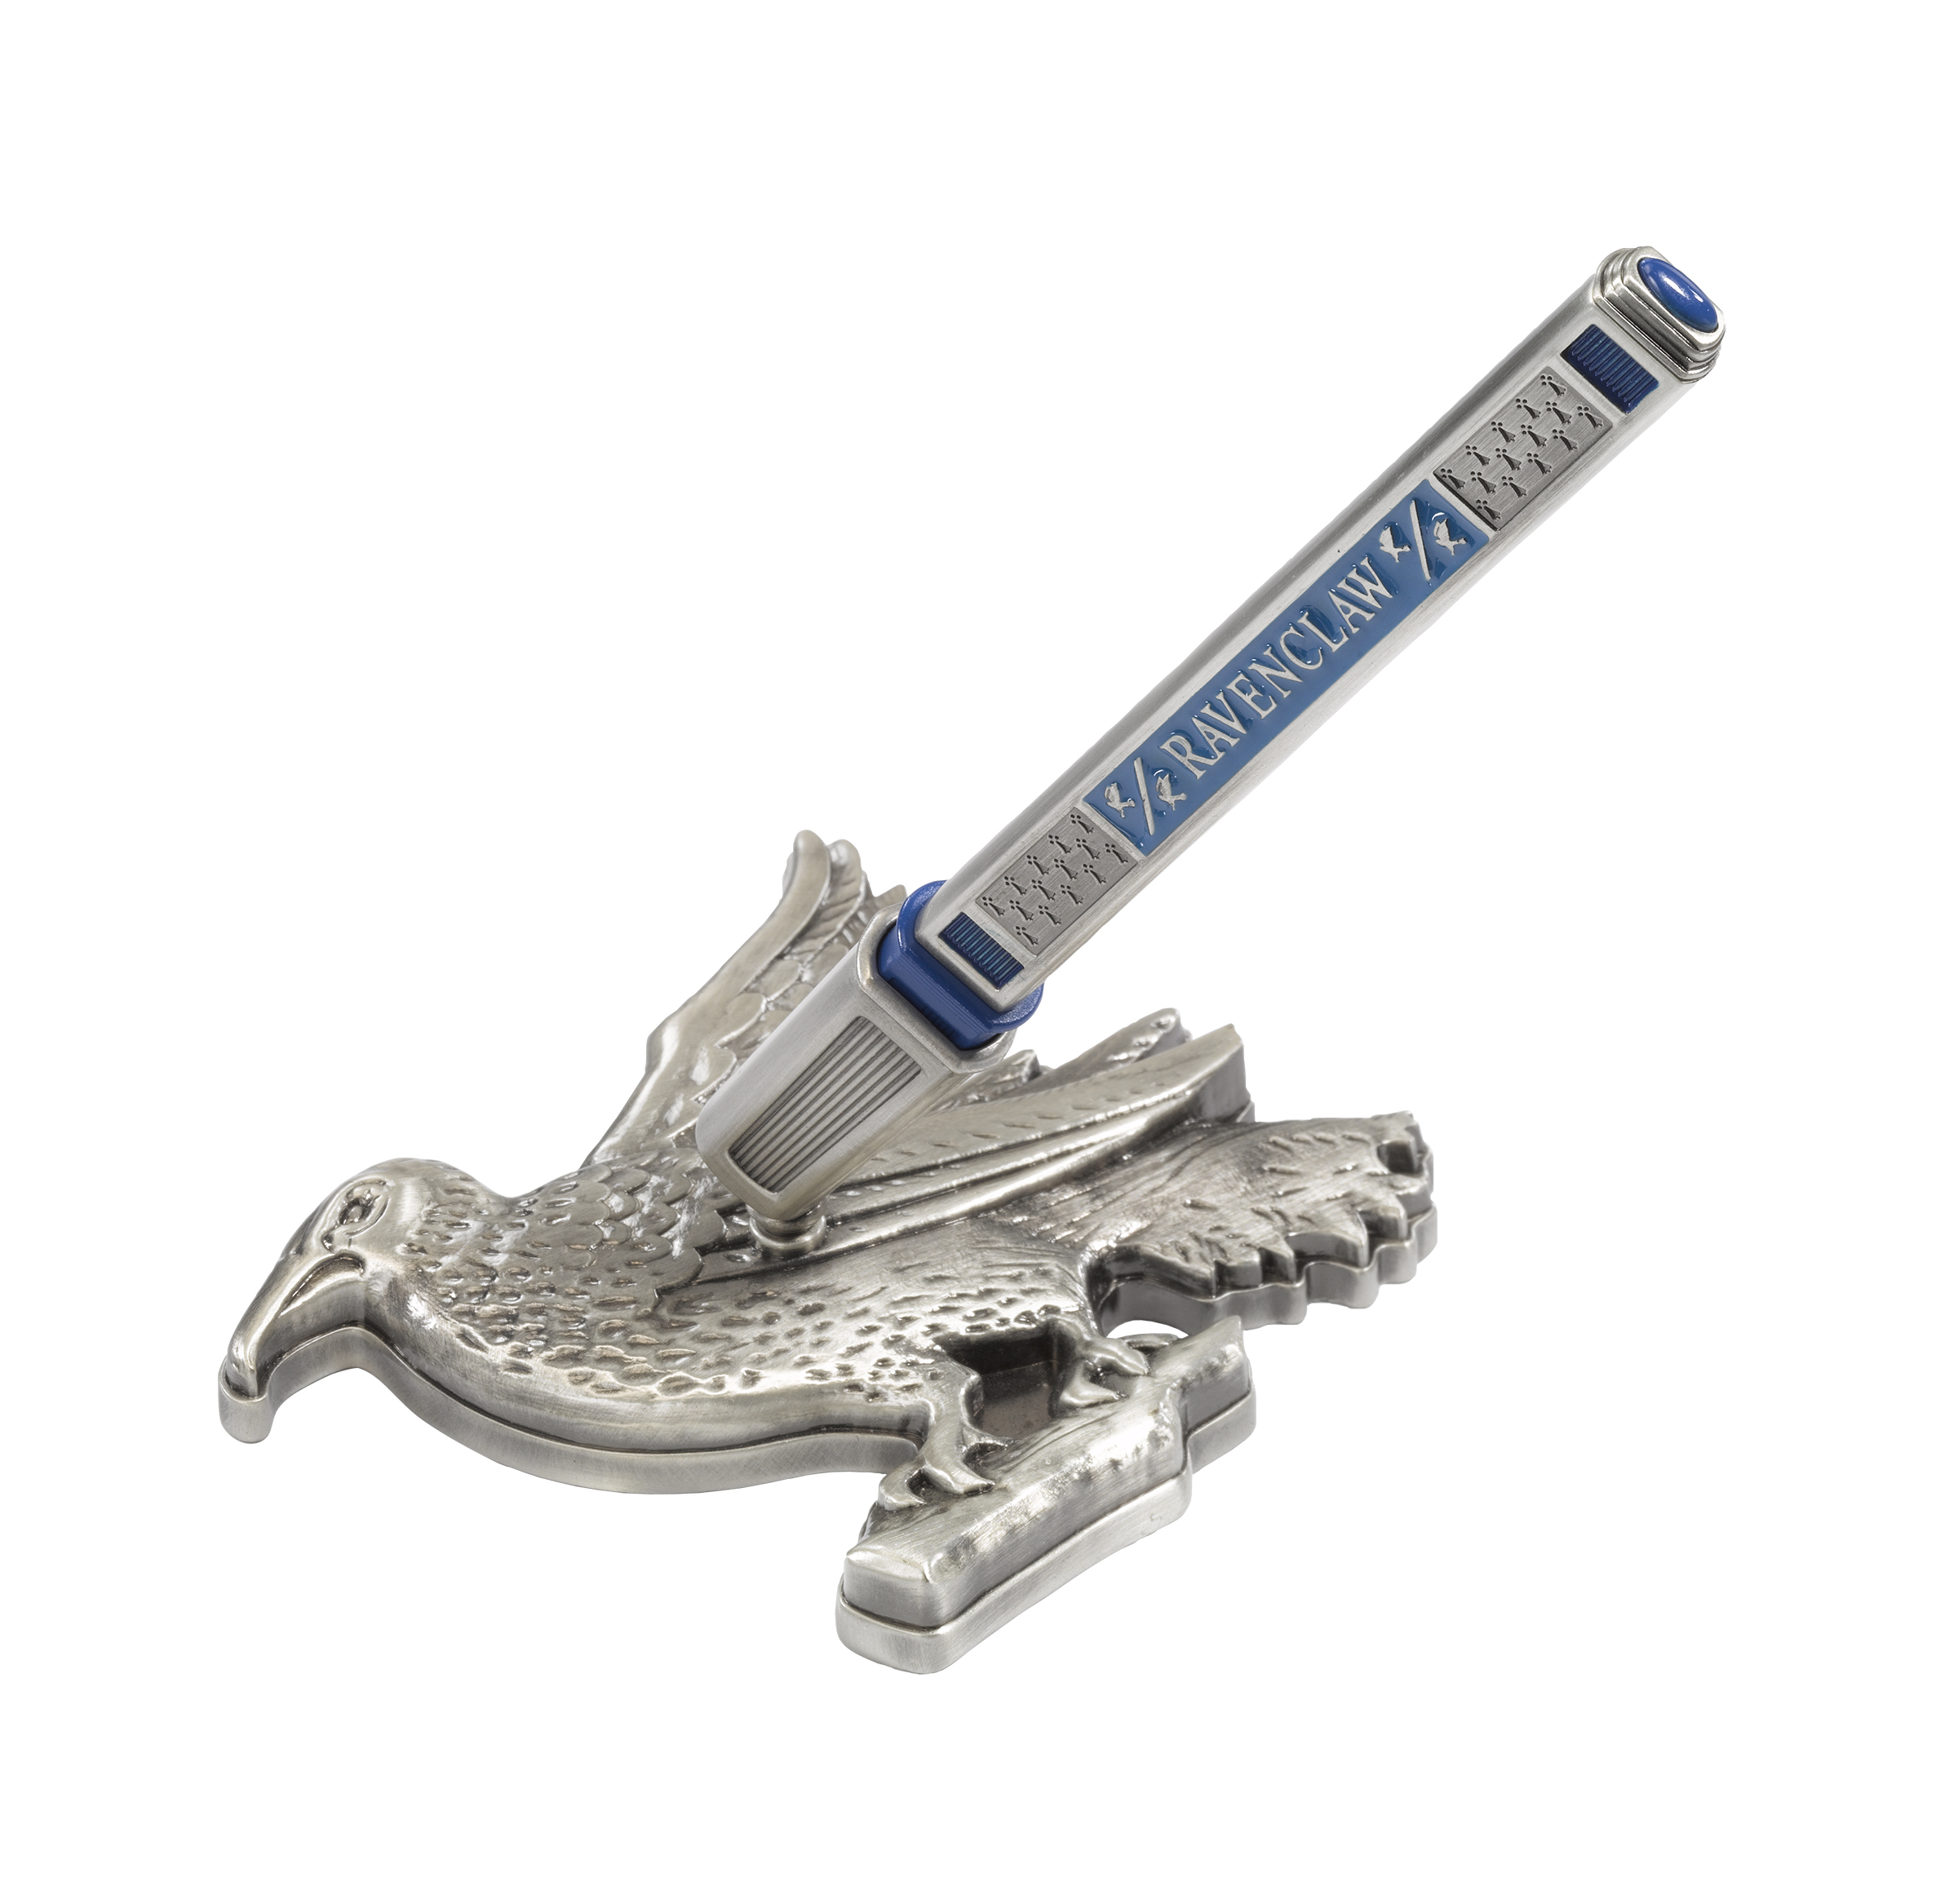 Ravenclaw House Pen and Desk Stand